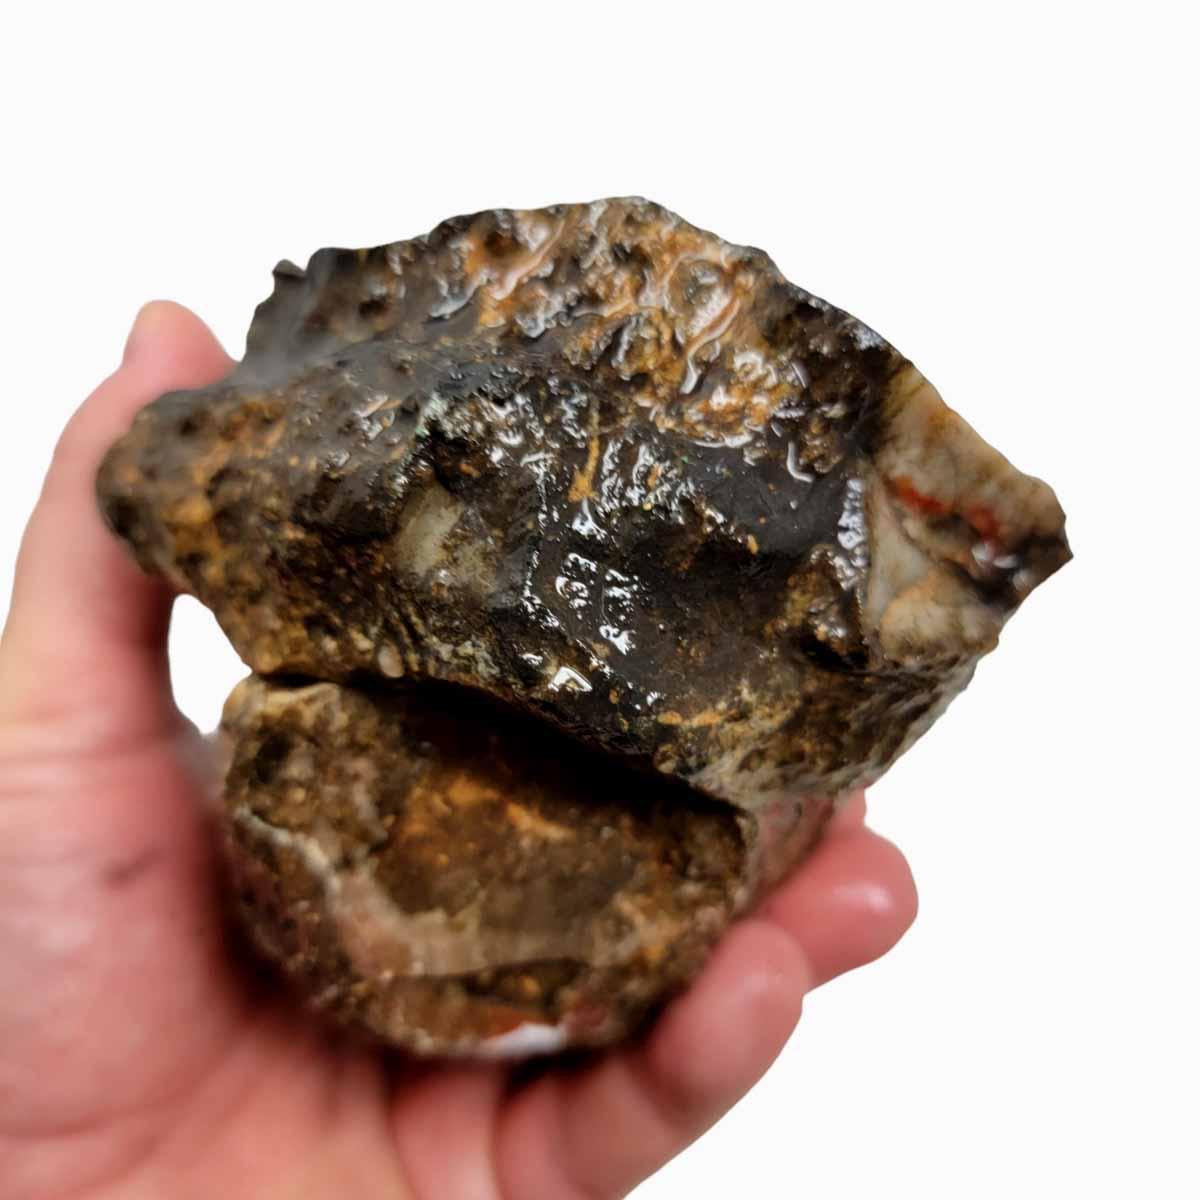 Coprolite Fossil Dino Poo Rough Chunk! - LapidaryCentral